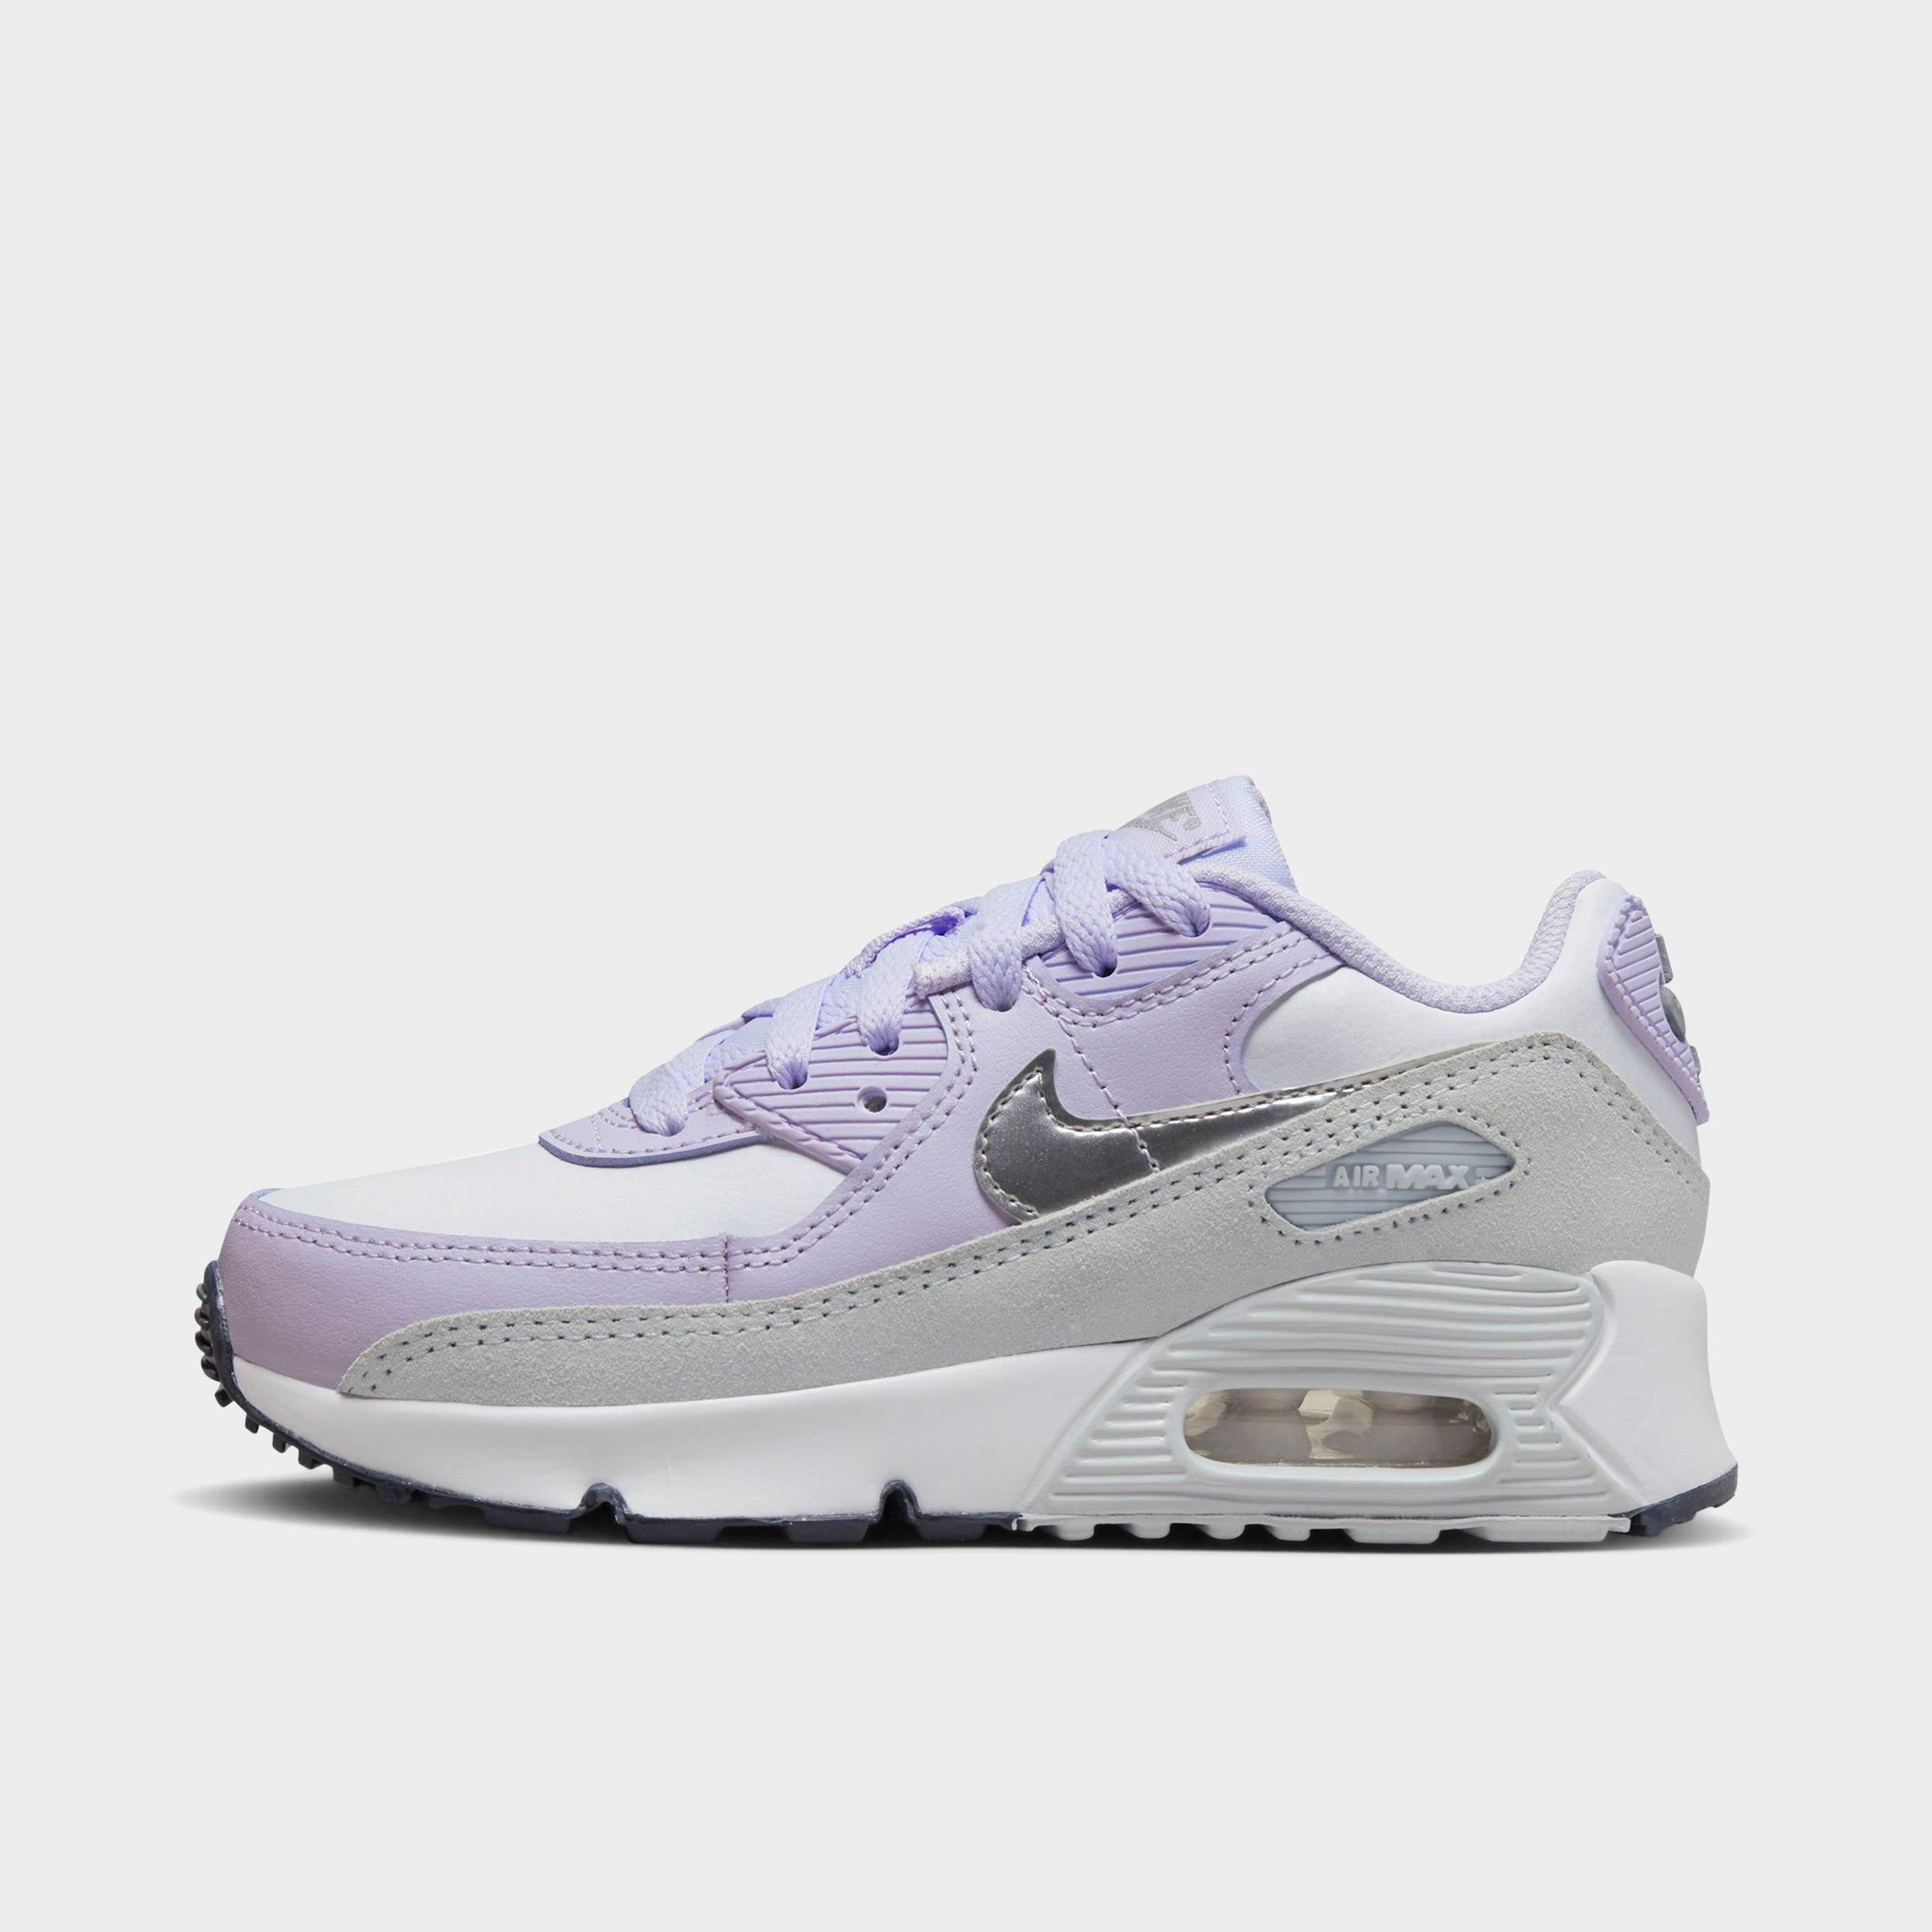 Nike Little Kids' Air Max 90 Casual Shoes Size 11.5 Leather In White/violet Frost/pure Platinum/metallic Silver